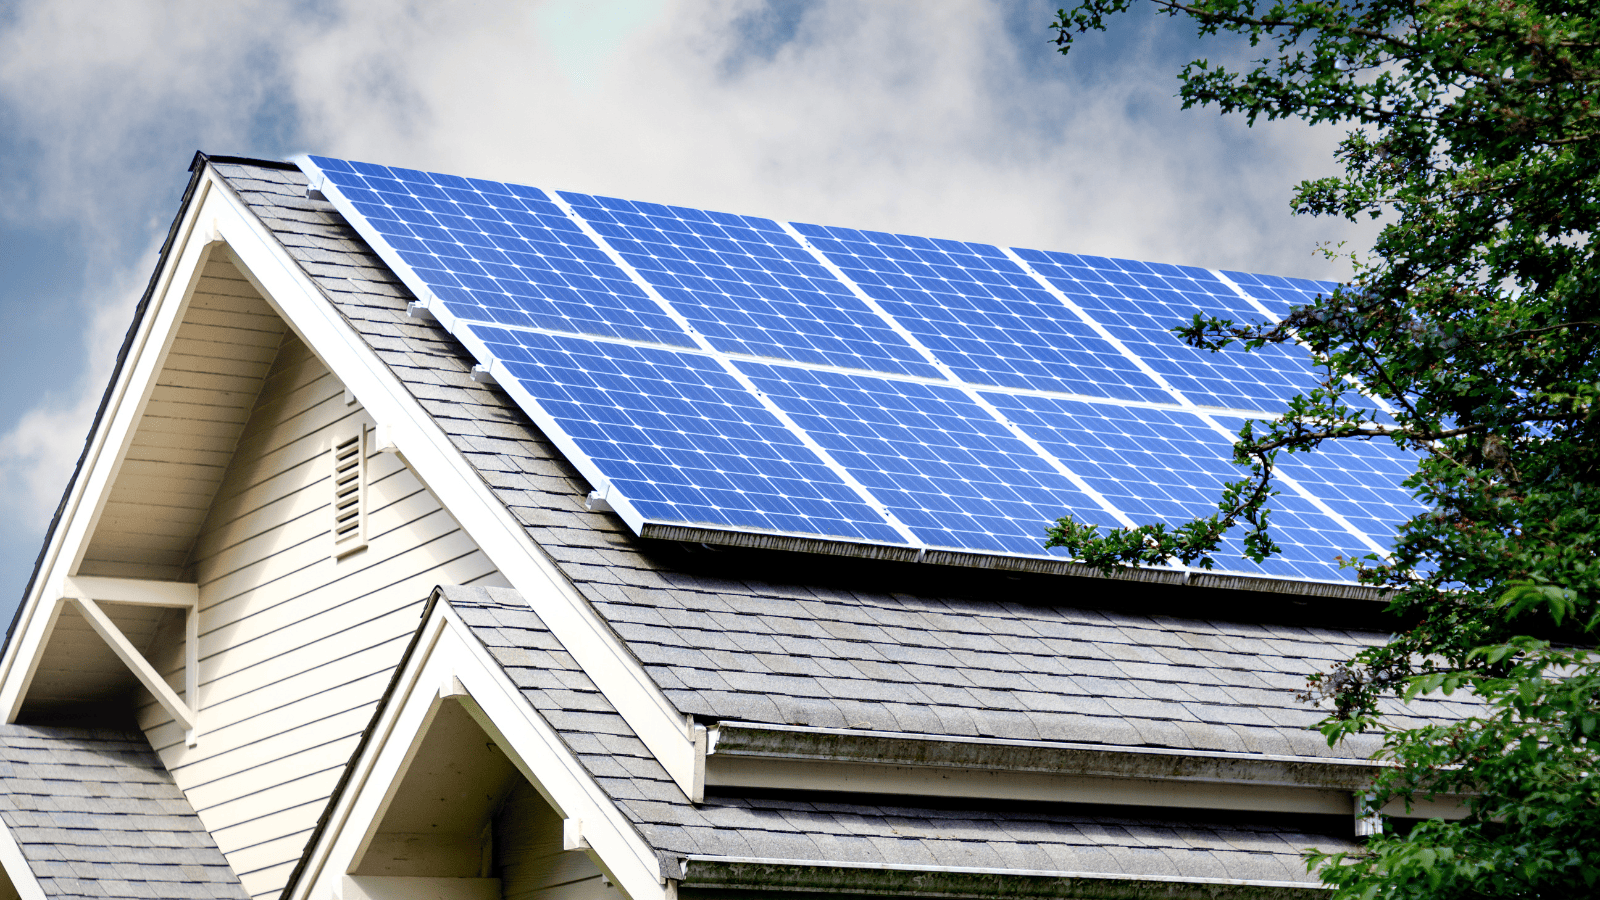 Remove Unfair Restrictions for Rooftop Solar in Michigan